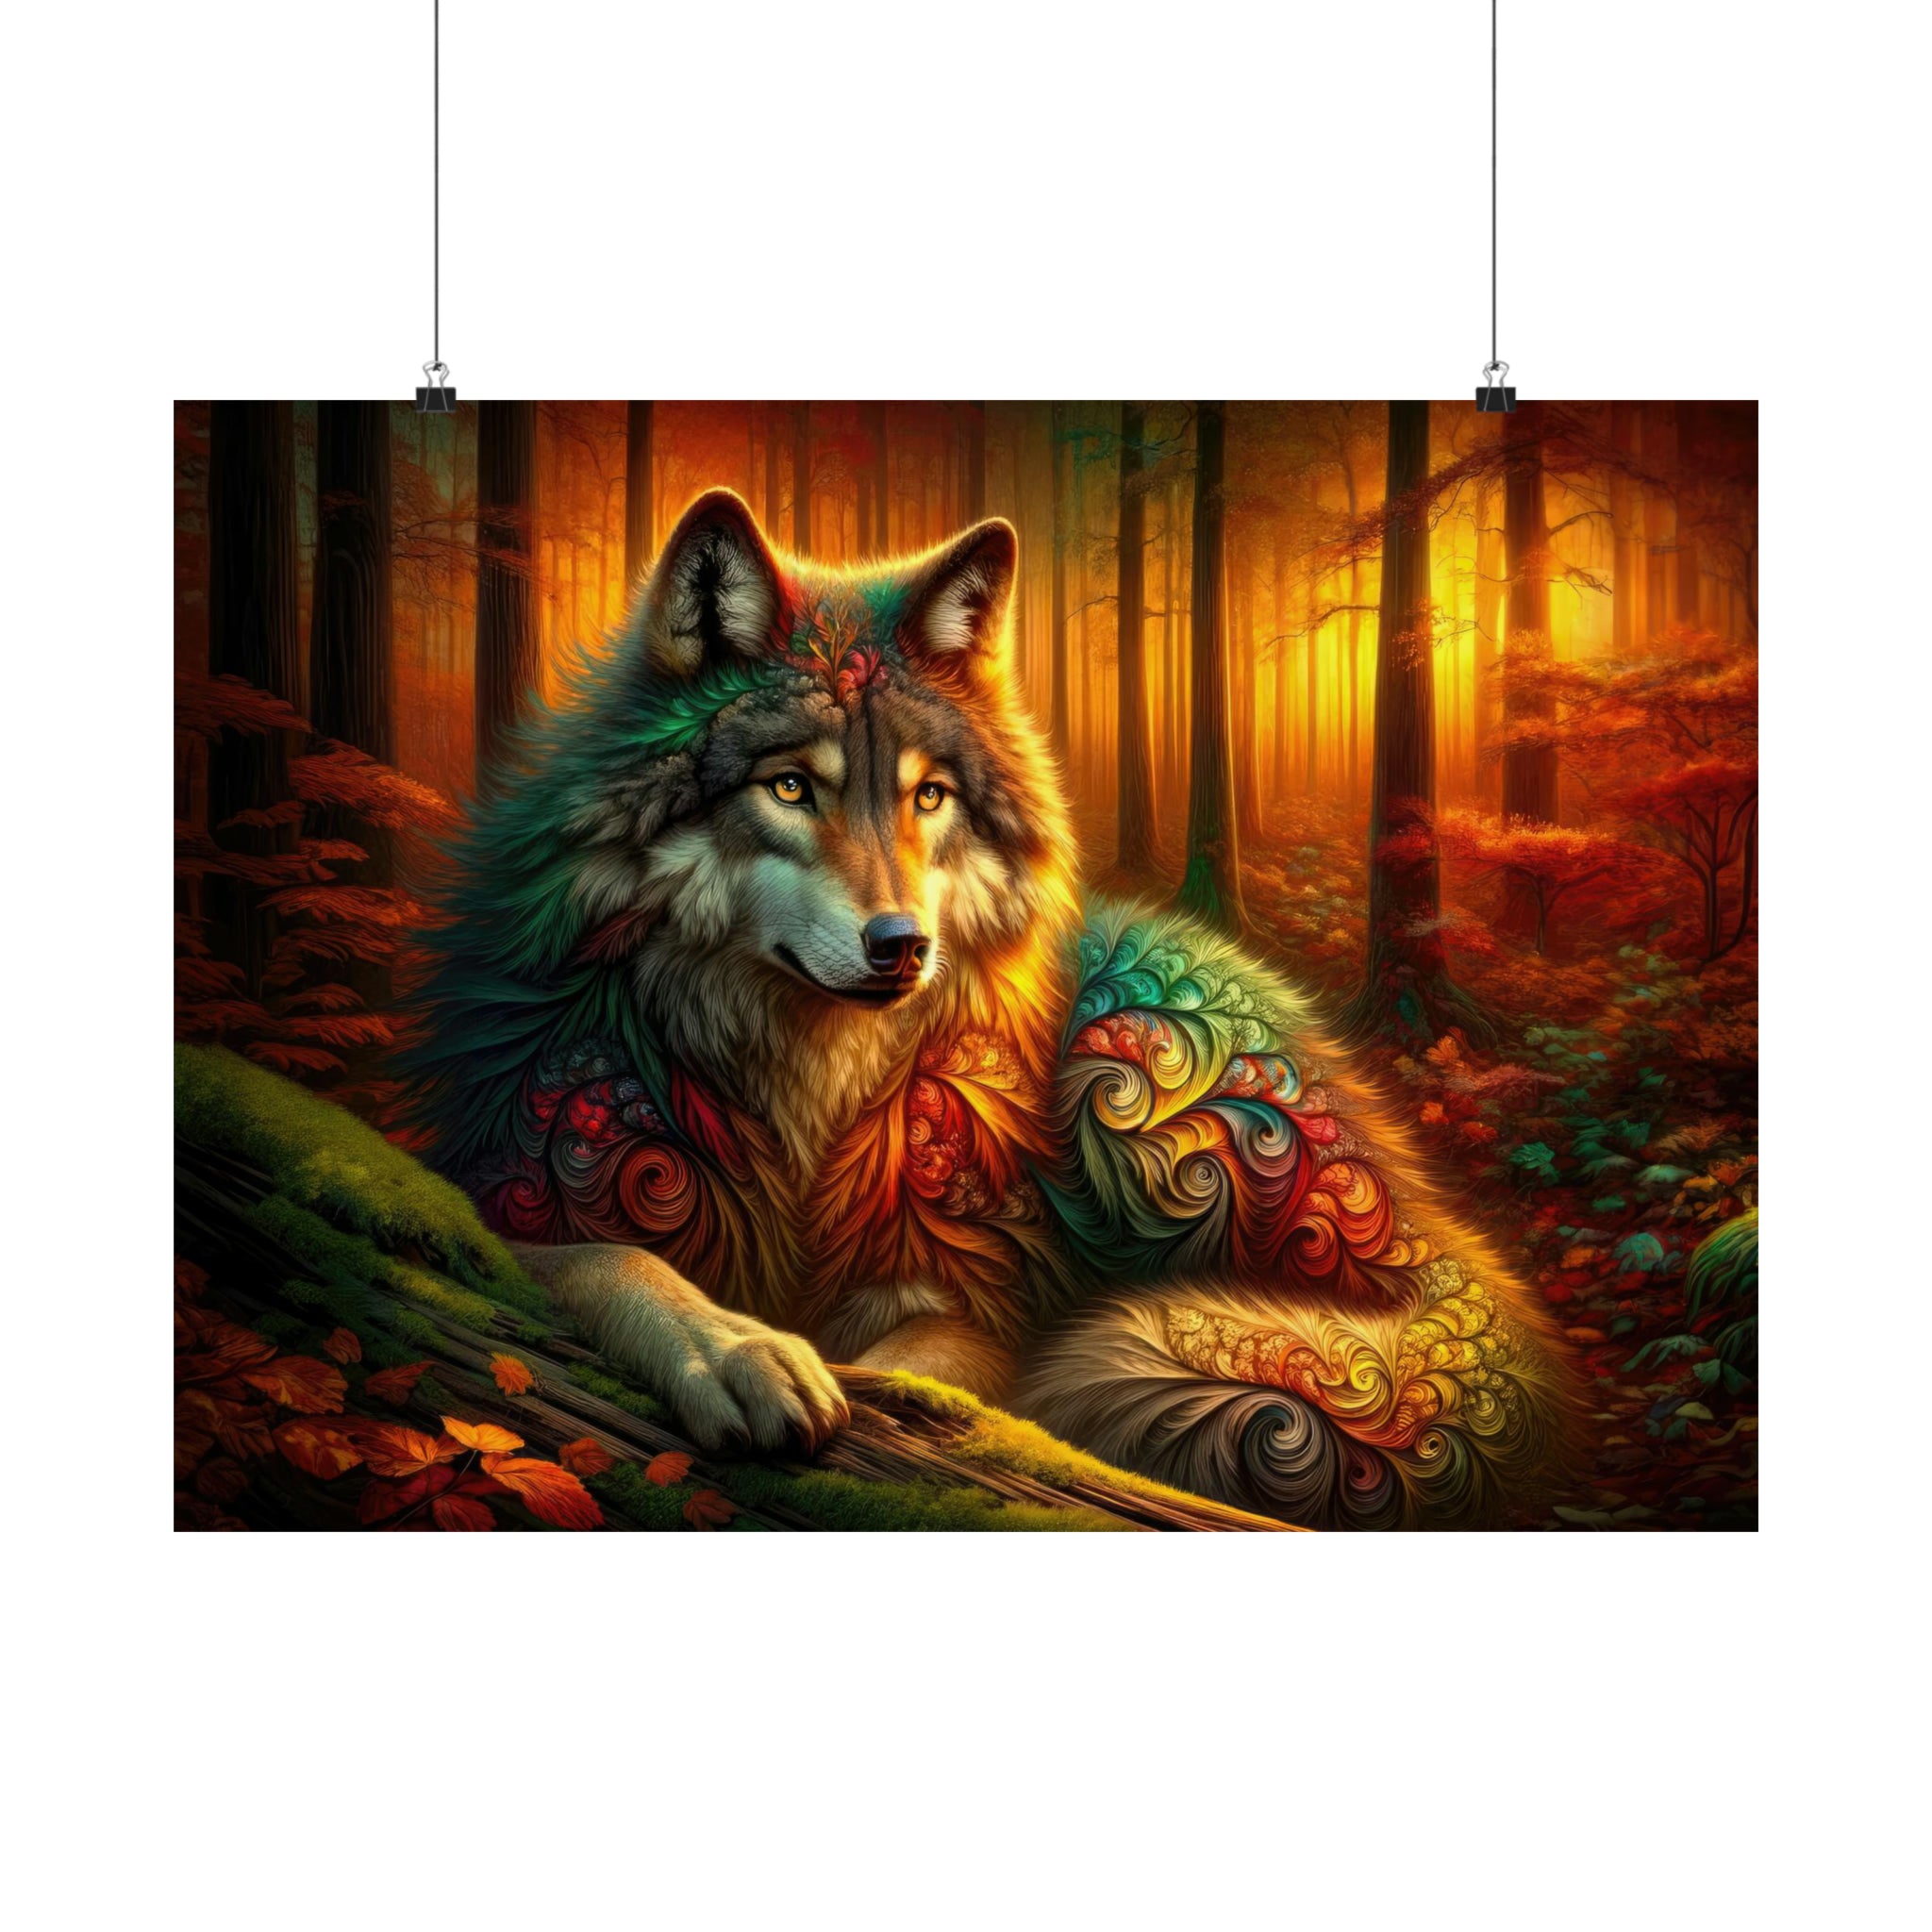 The Wolf Amidst Autumn's Embrace Poster